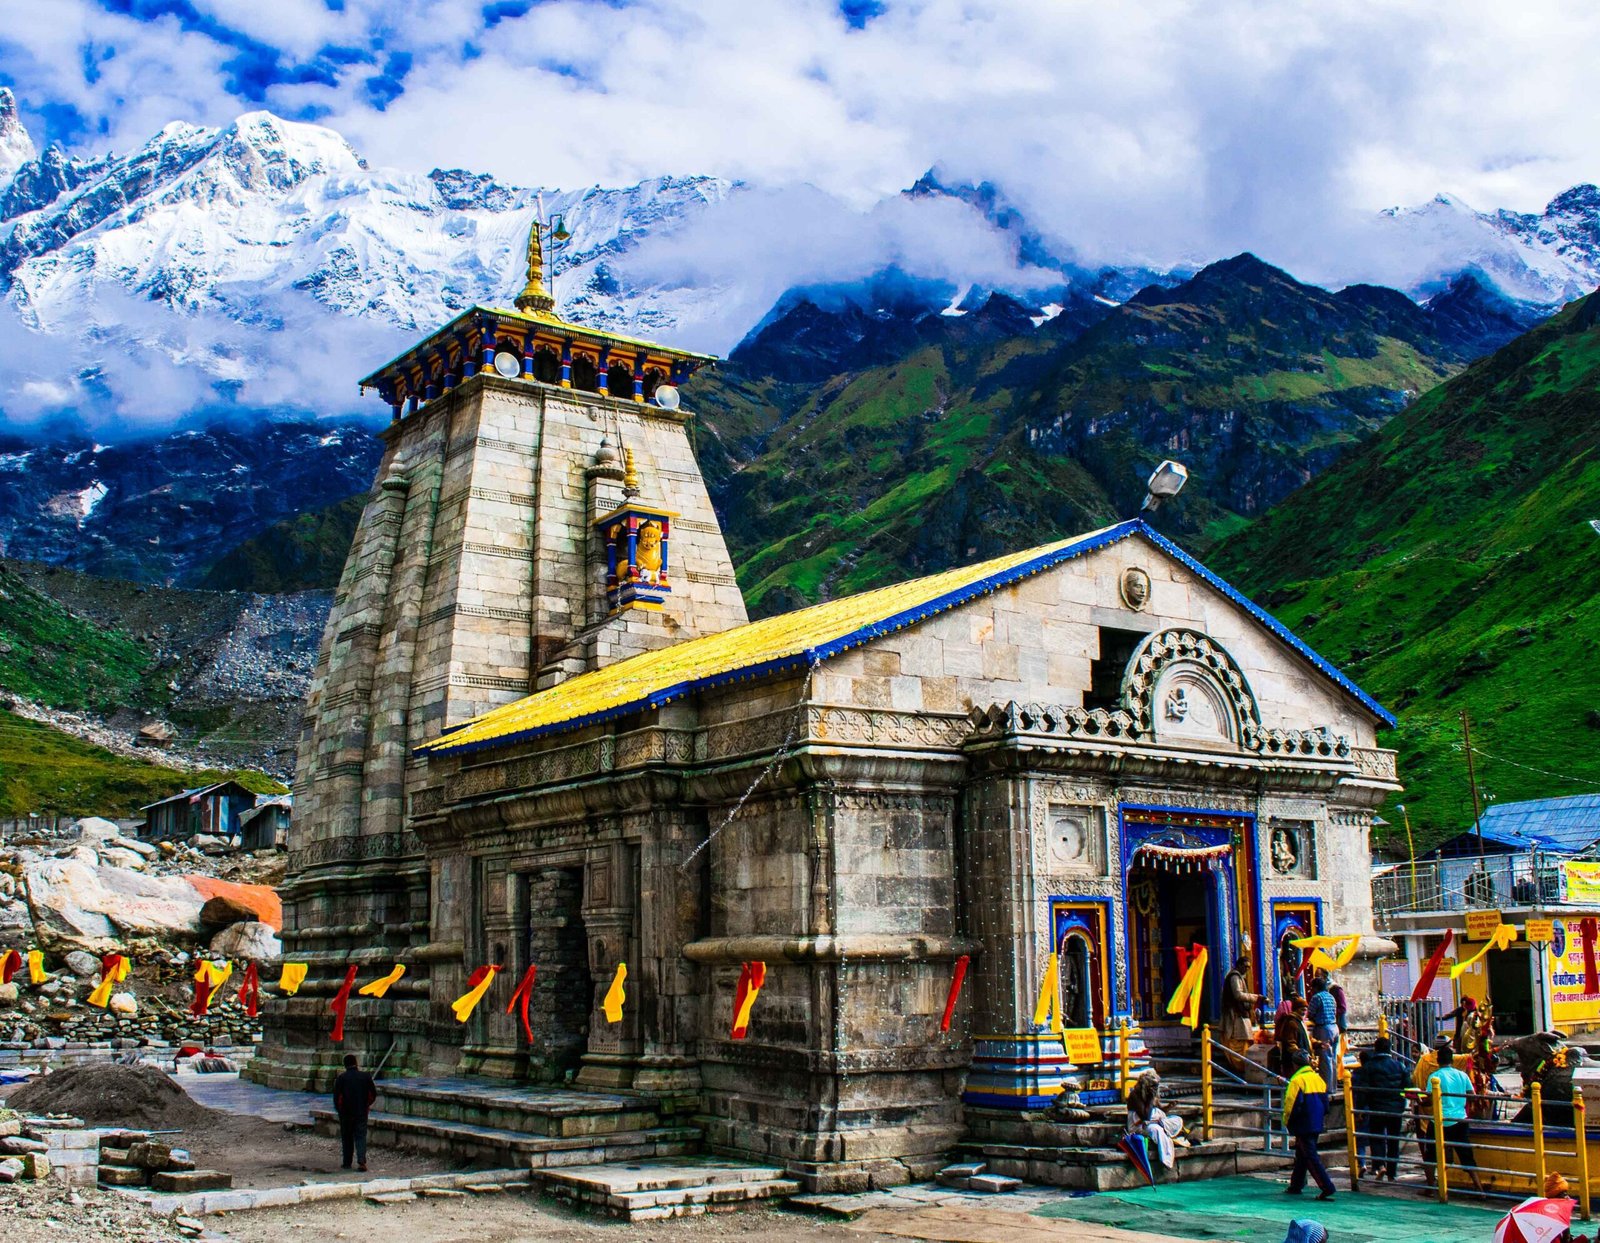 How much does a trip to Kedarnath cost?